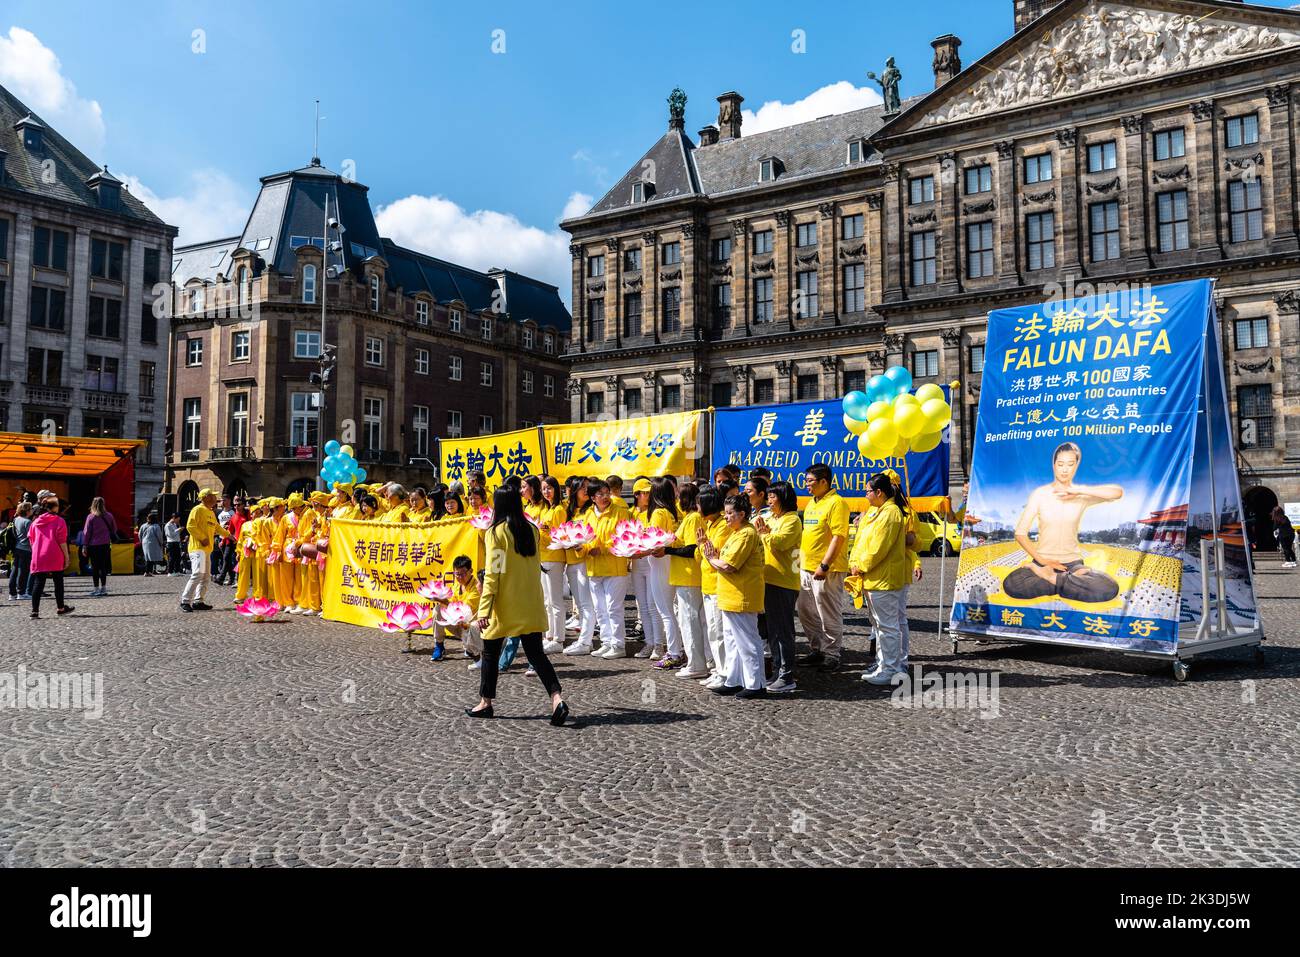 Amsterdam, Netherlands - May 7, 2022: Falun Dafa practitioners during protest day in Dam square Stock Photo